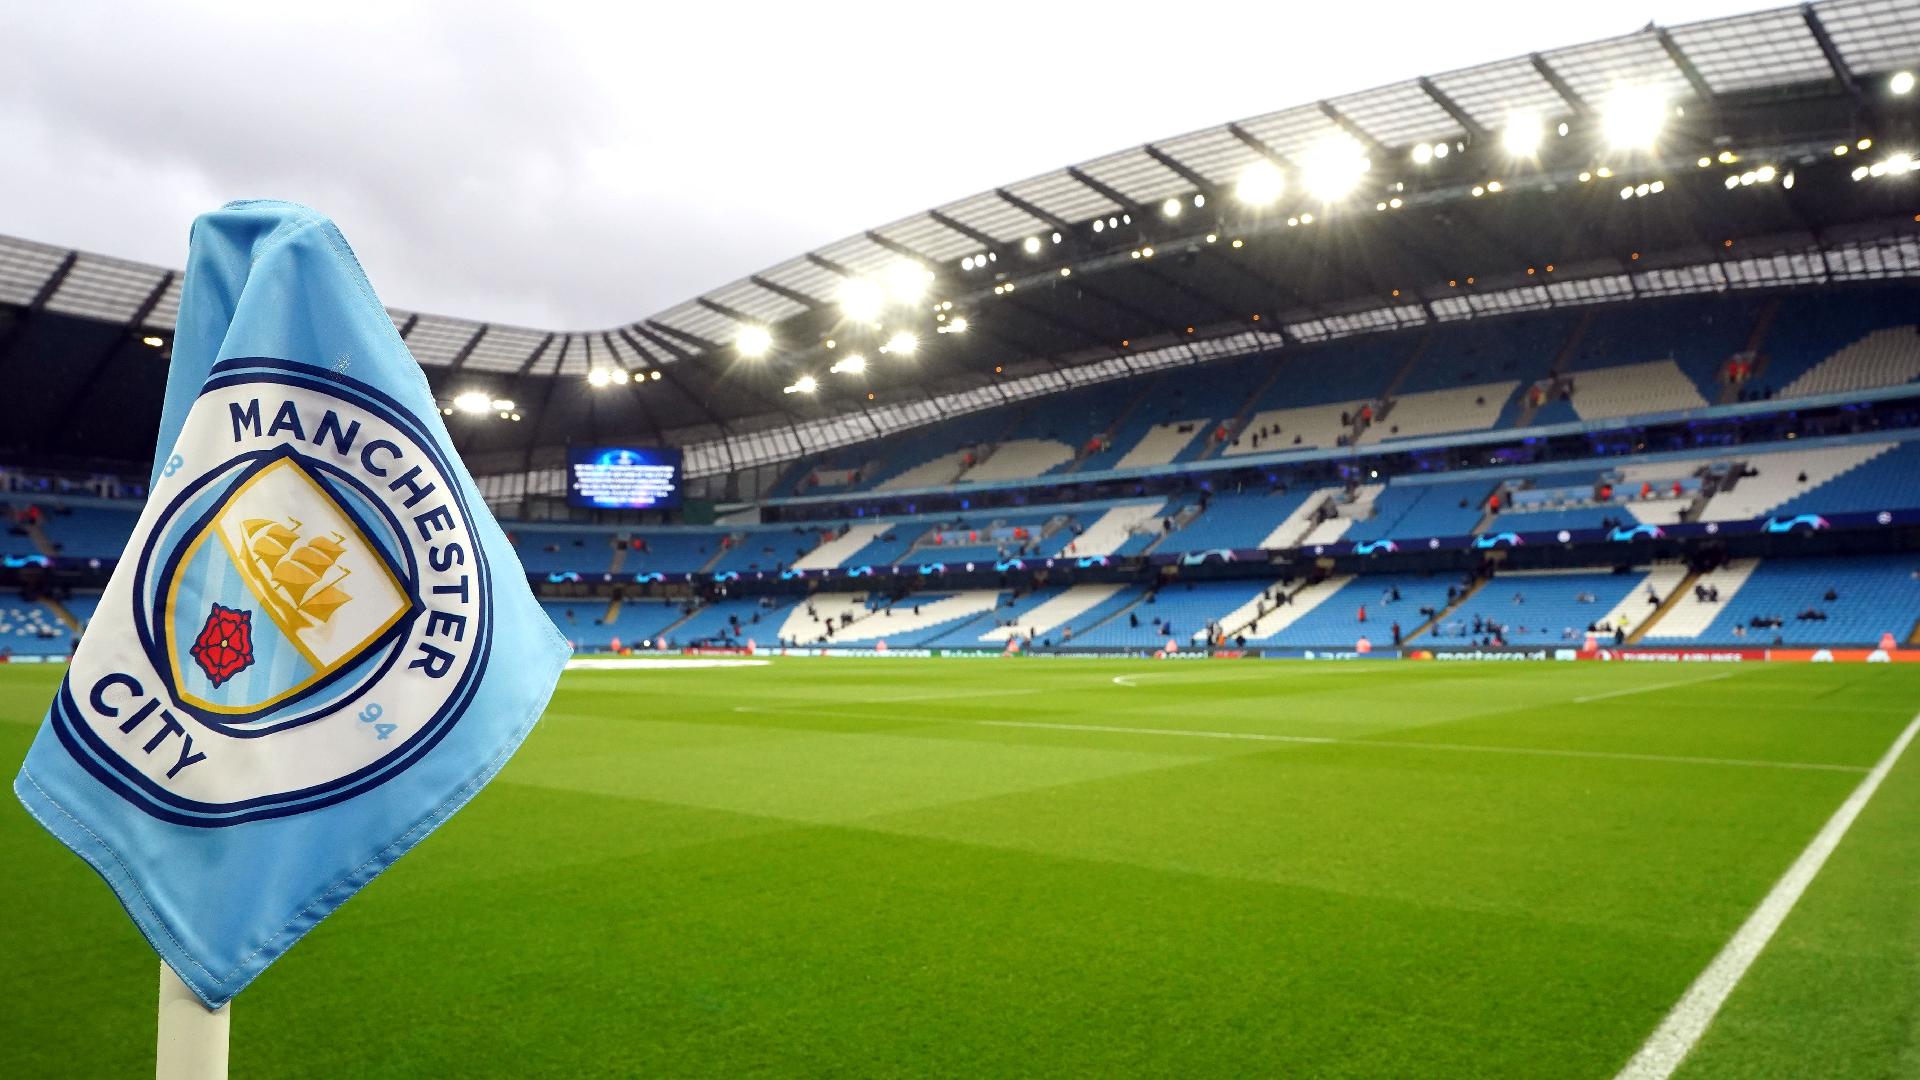 115 charges: New development rises in Manchester City battle